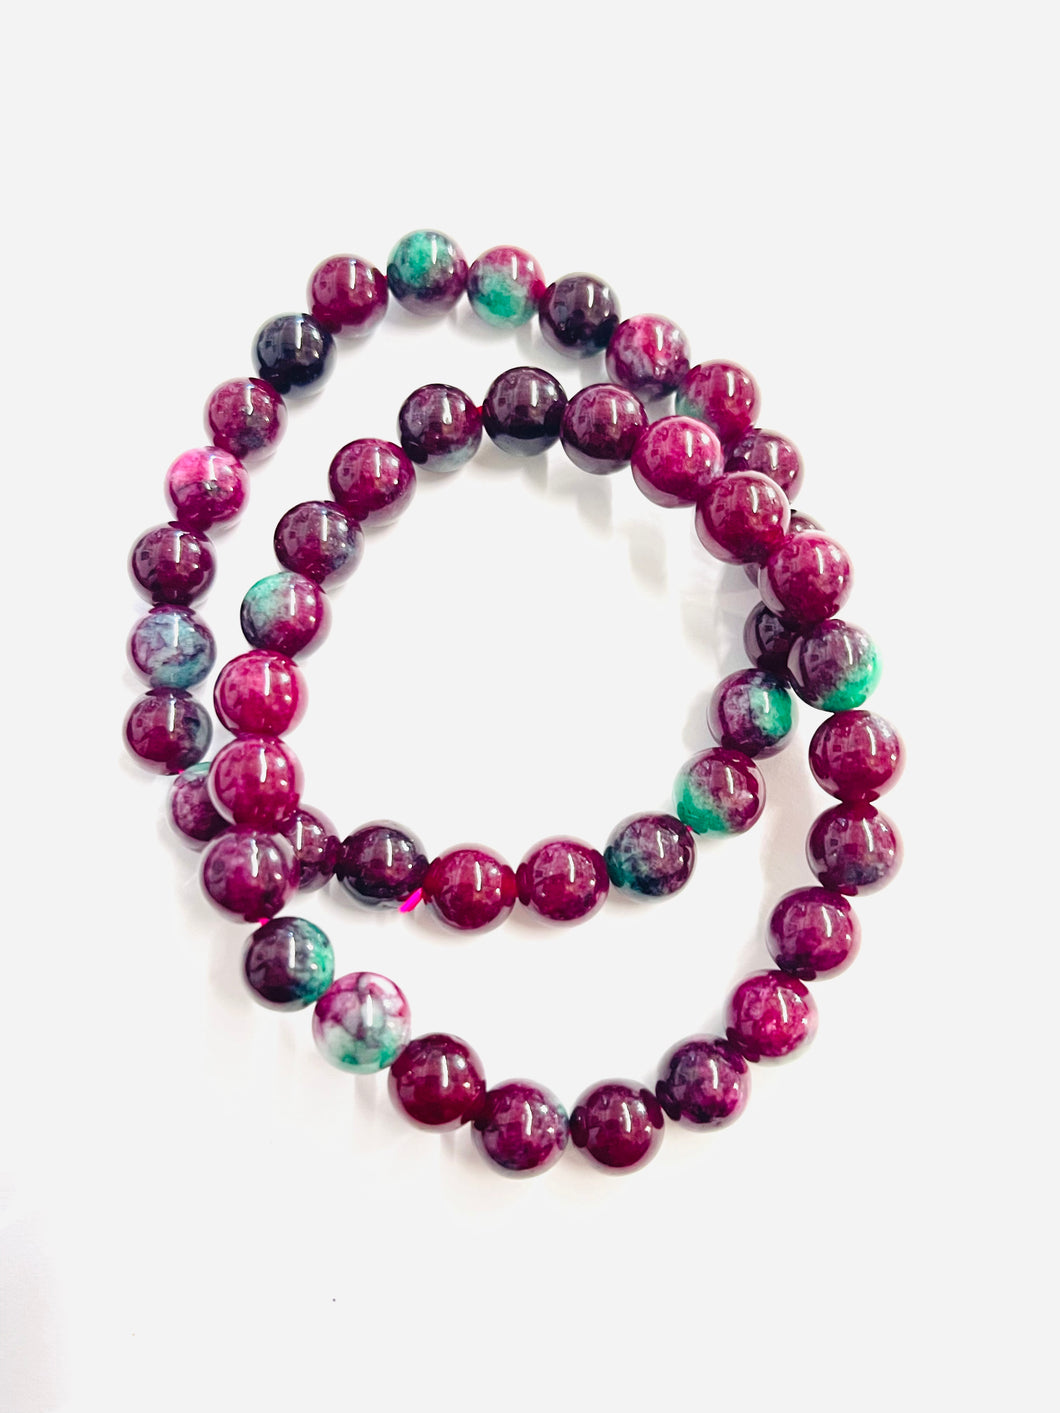 Bracelet with Ruby in zoisite 7mm beads